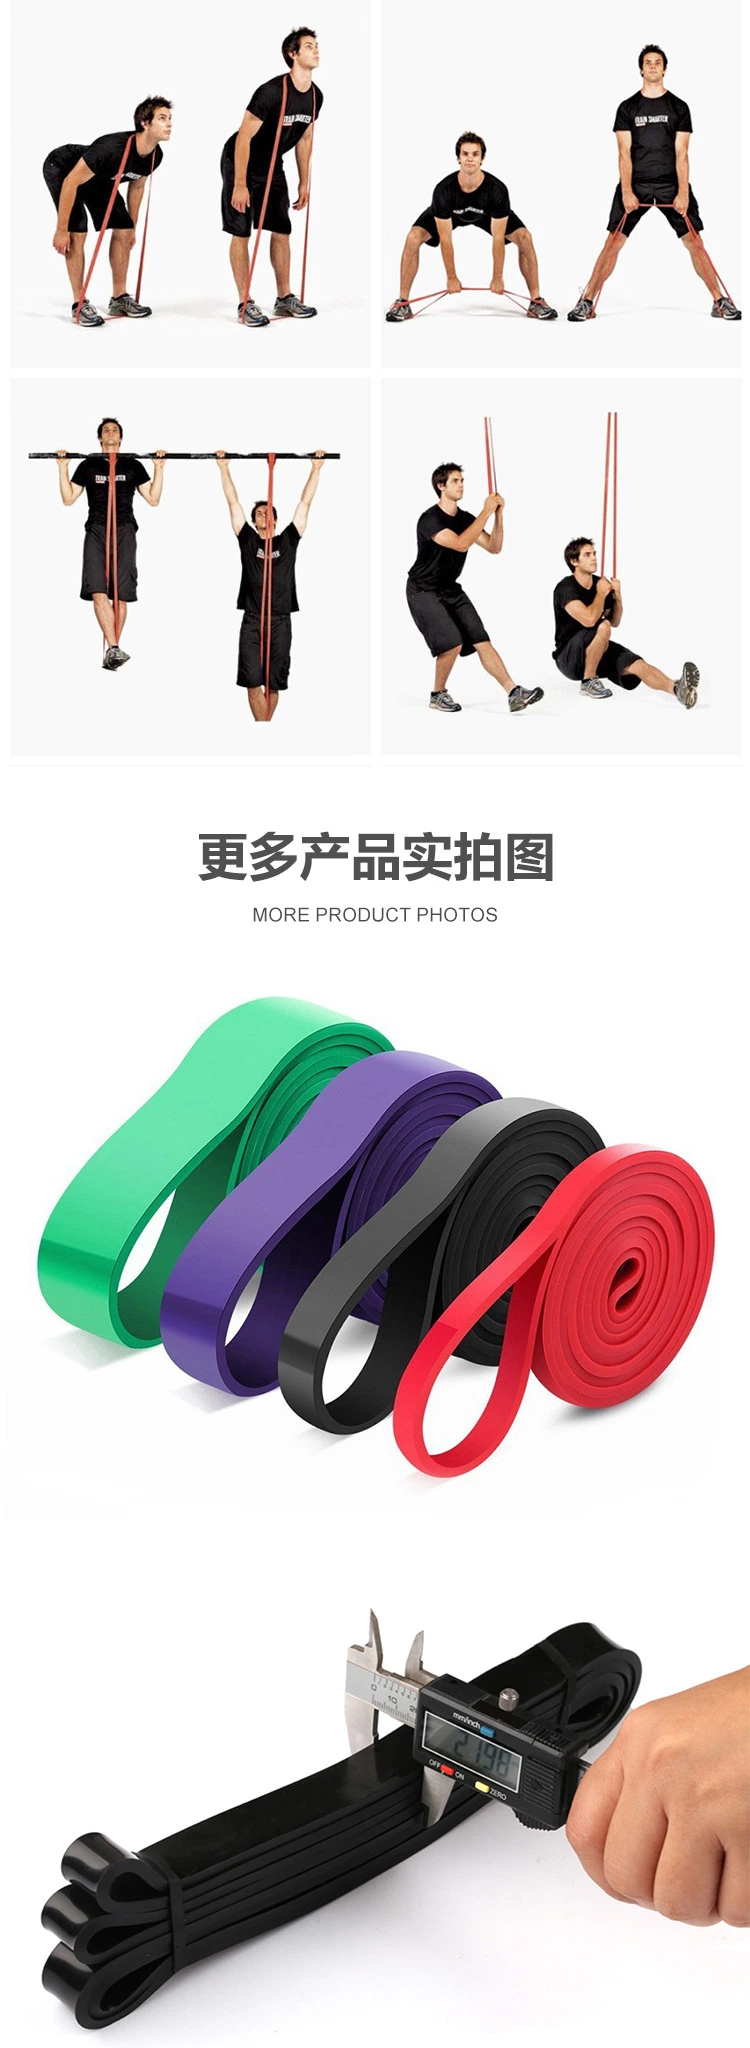 100% Latex Power Training Exercise Resistance Bands